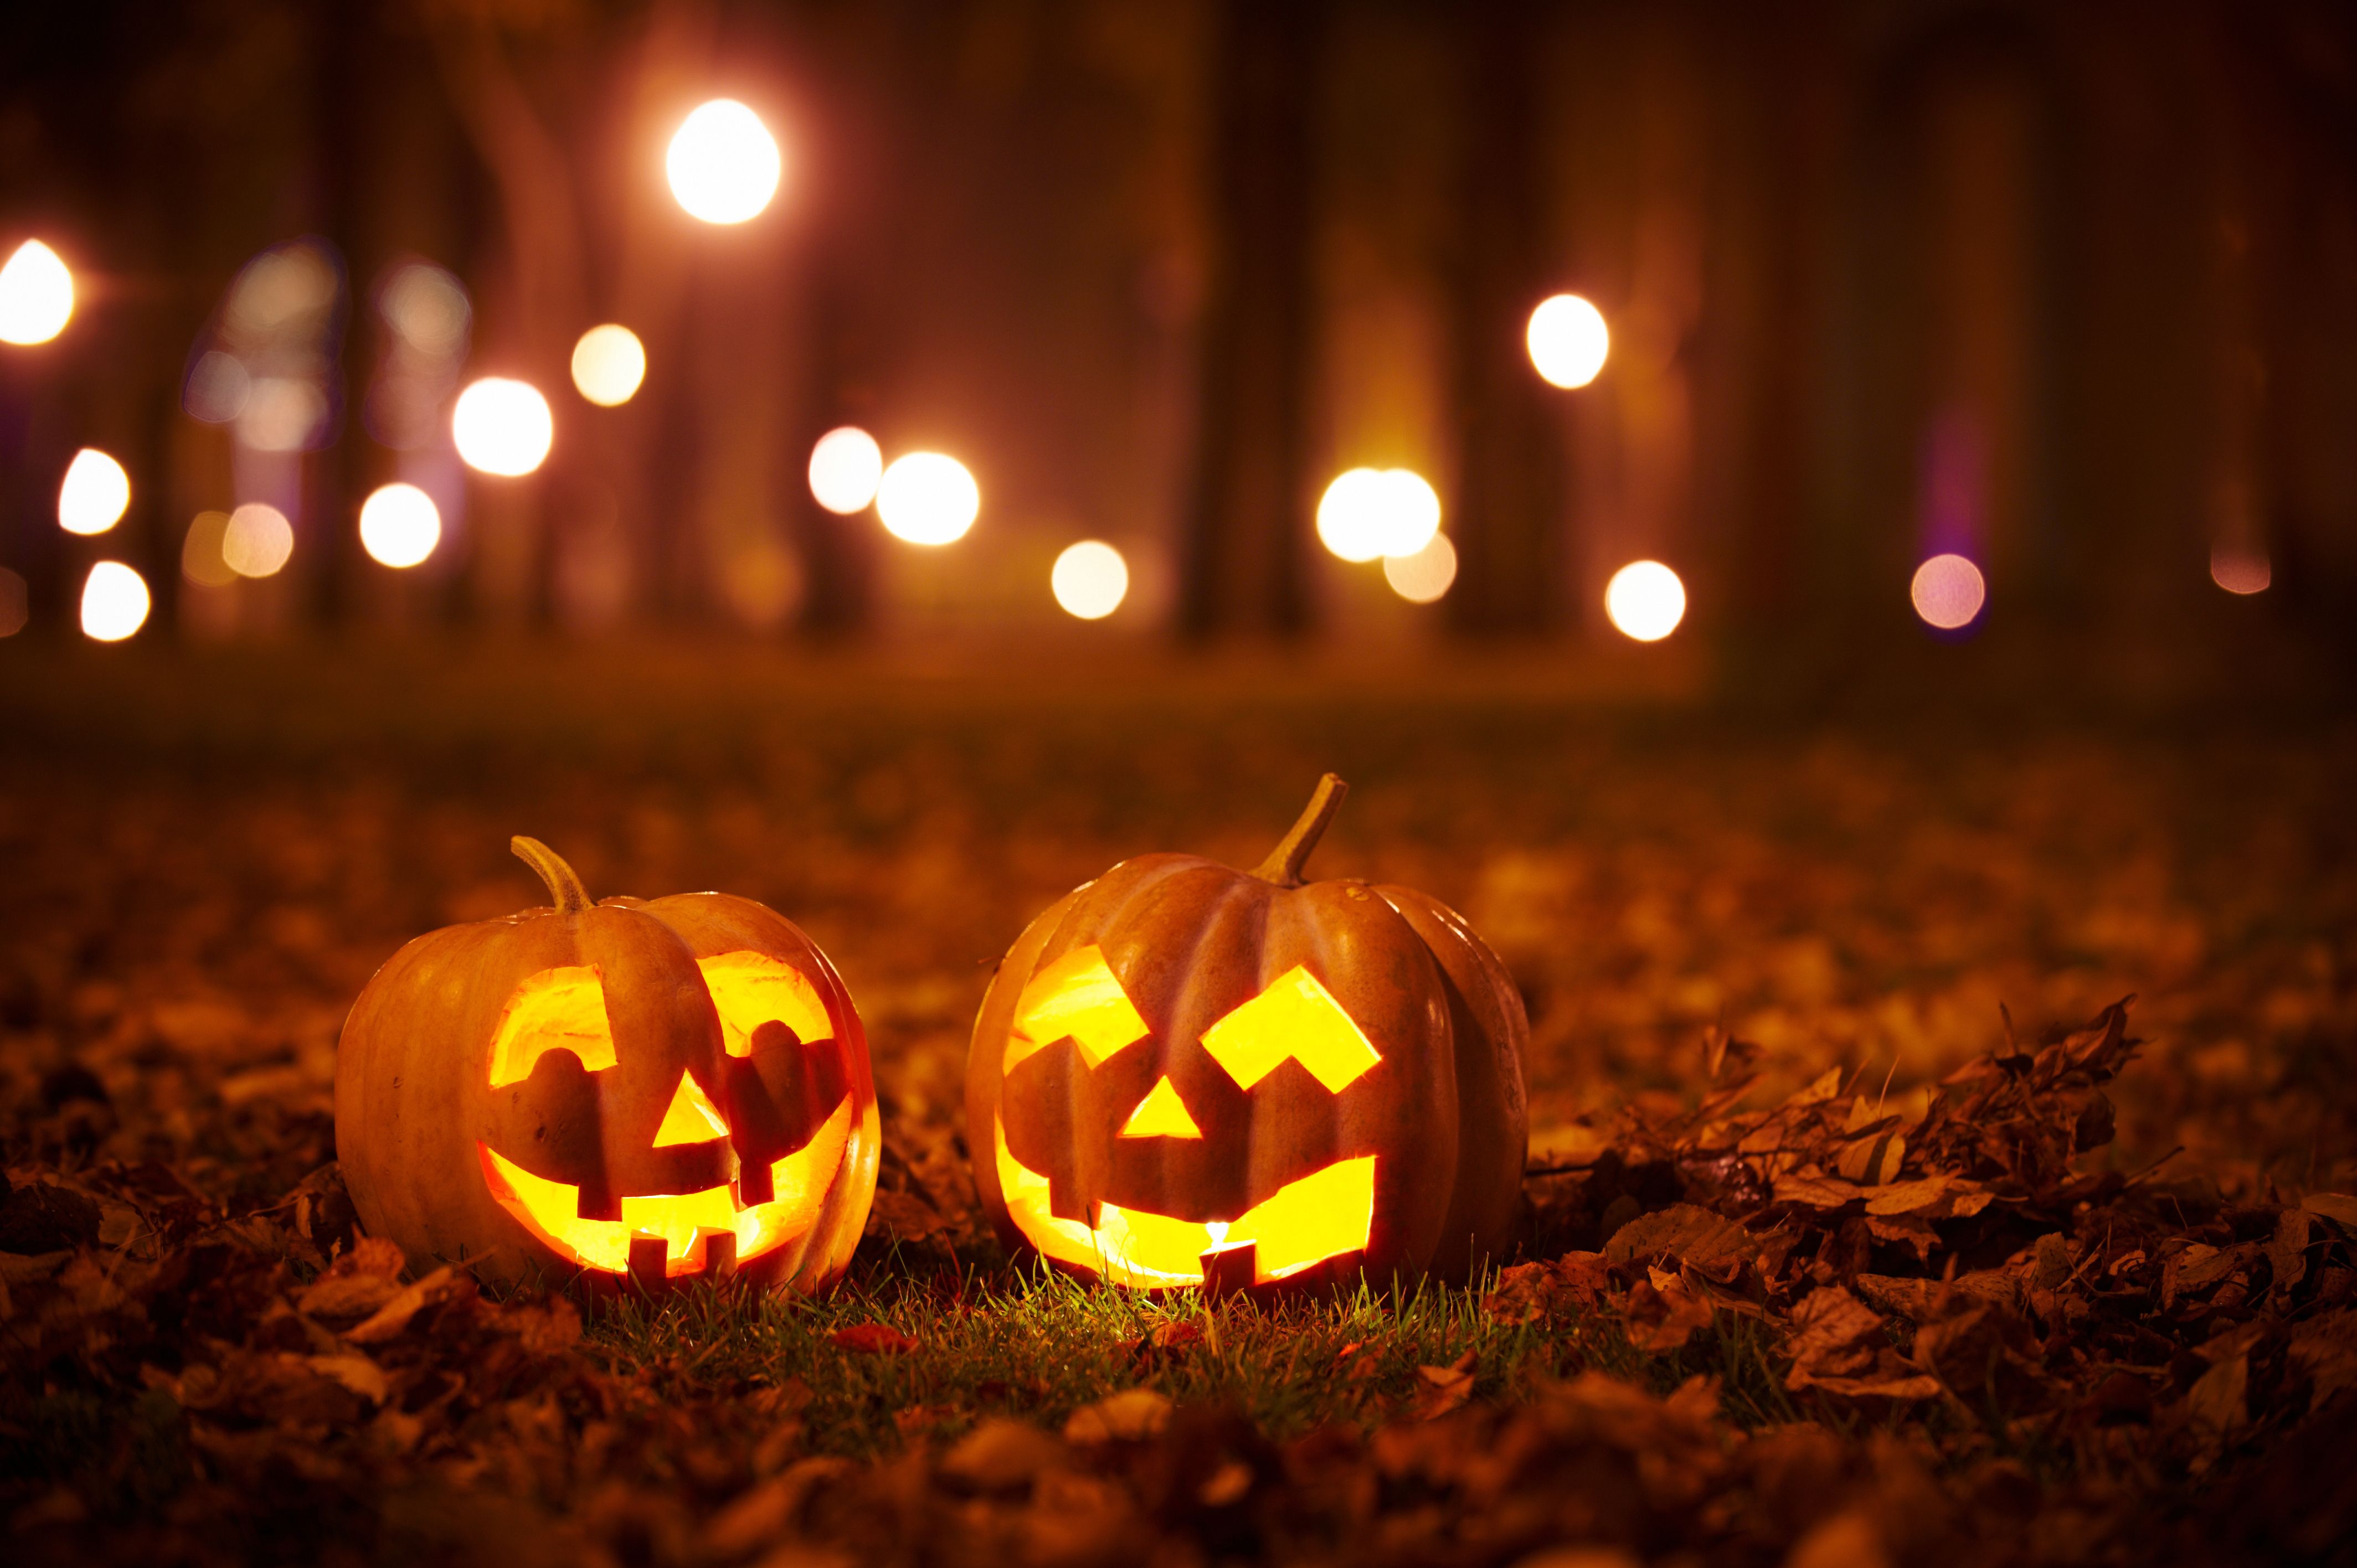 generic image of two jack-o-lanterns on grass with orange and black colors.